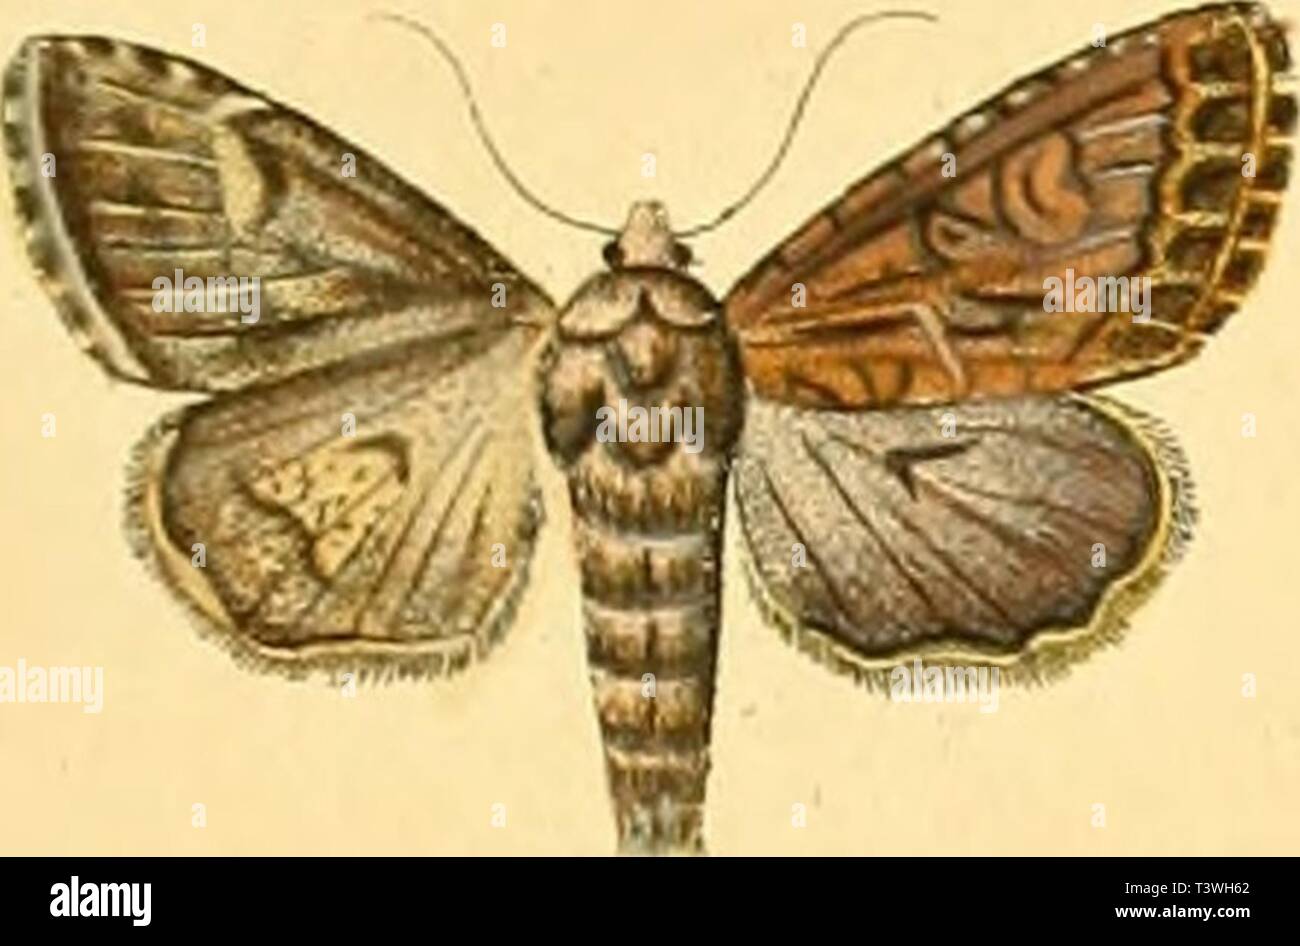 Archive image from page 46 of Die Schmetterlinge in Abbildungen nach. Die Schmetterlinge in Abbildungen nach der Natur  dieschmetterling45espe Year: 1829  â¢lo ni.IVr Tab. CXtV: Xo f t. C)Ã¼.    Jt. â f.. Stock Photo